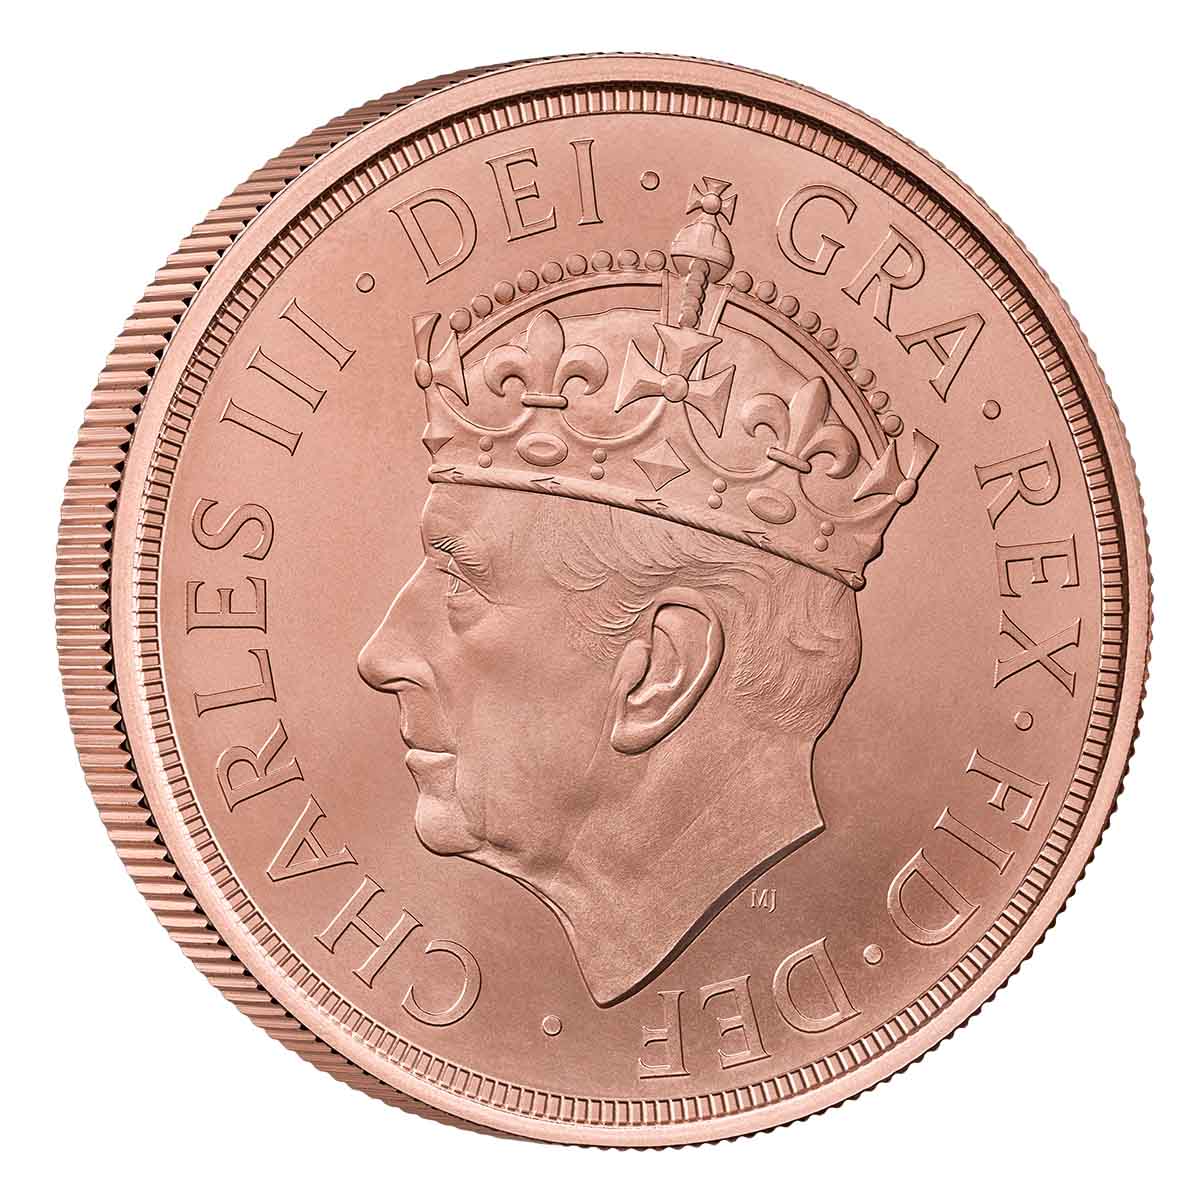 The Coronation of His Majesty King Charles III Five Sovereign Piece 2023 Brilliant Uncirculated